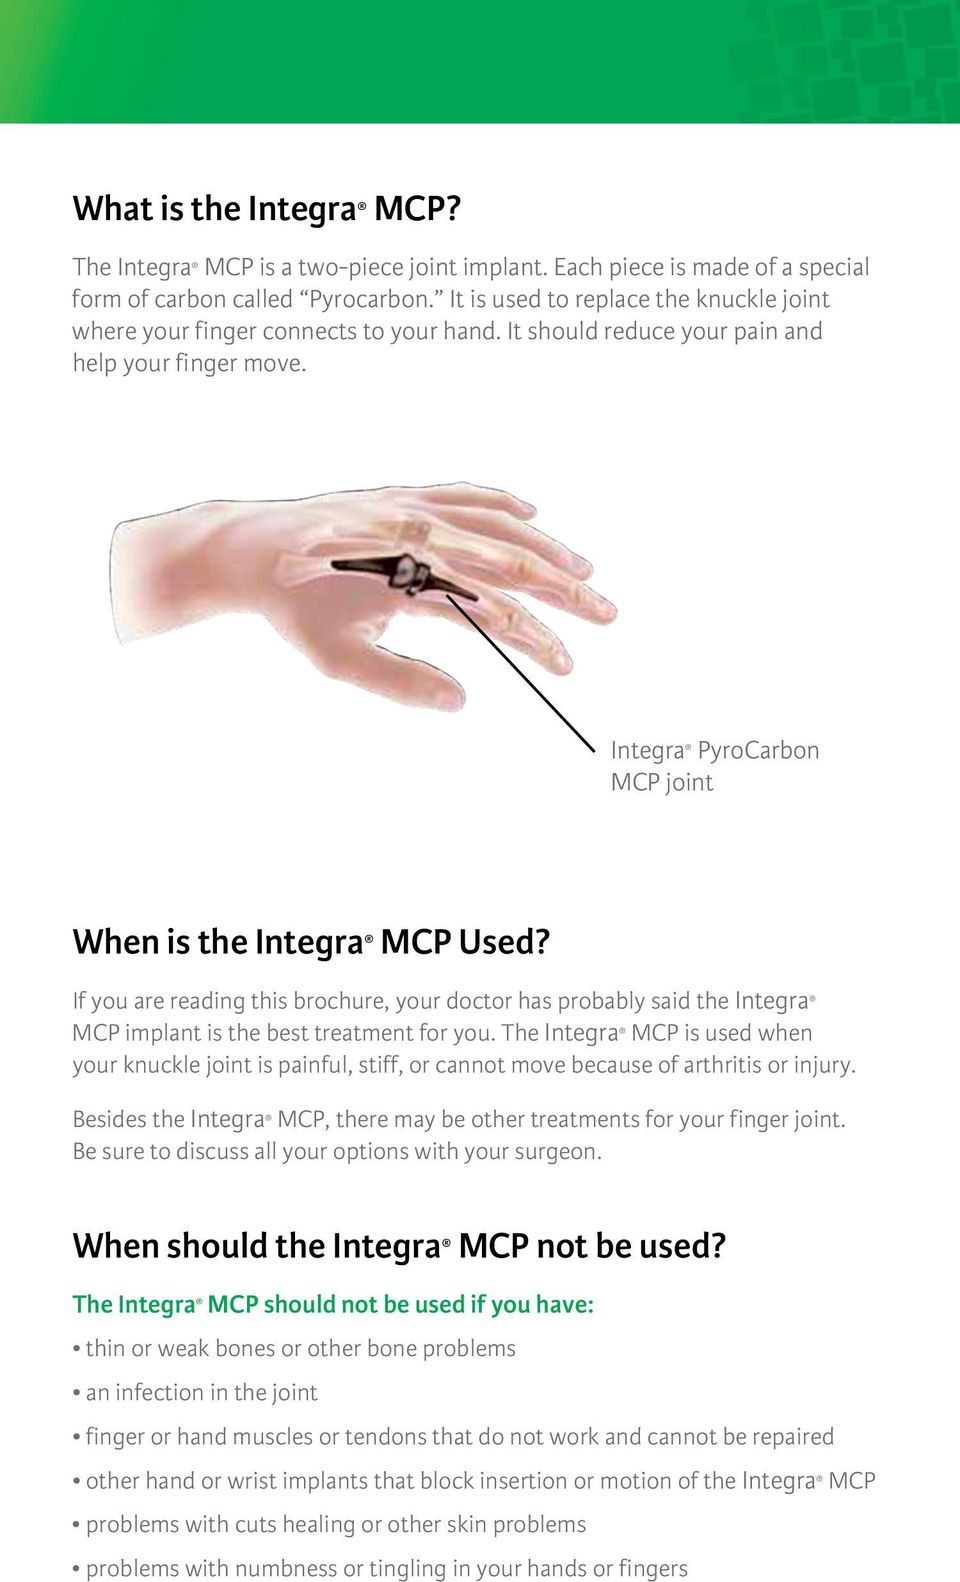 If you are reading this brochure, your doctor has probably said the Integra MCP implant is the best treatment for you.